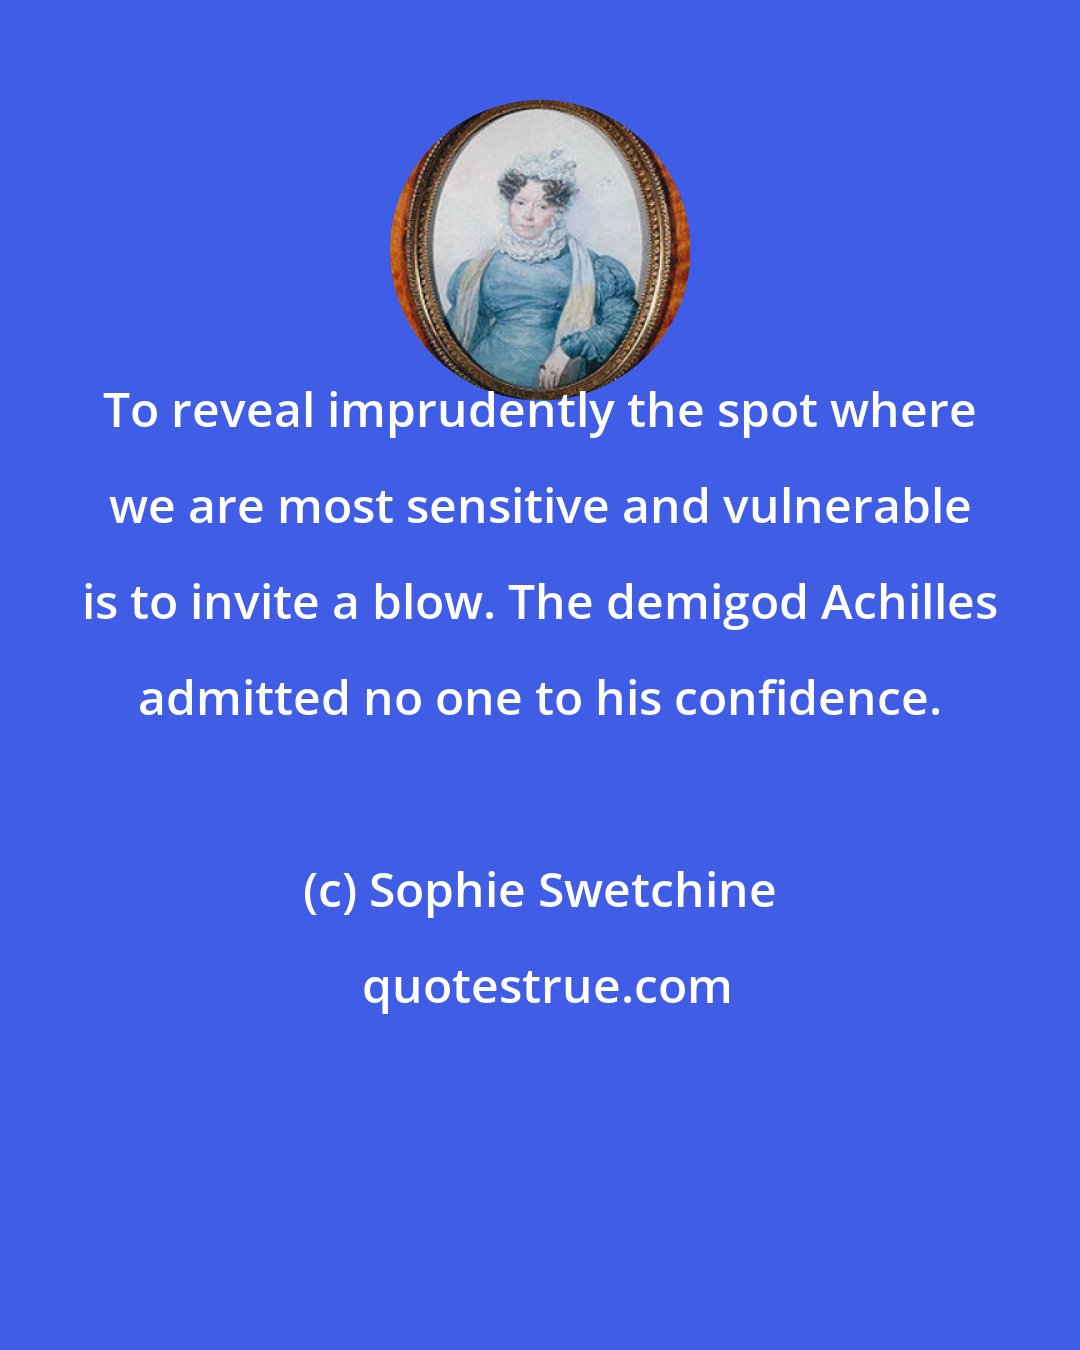 Sophie Swetchine: To reveal imprudently the spot where we are most sensitive and vulnerable is to invite a blow. The demigod Achilles admitted no one to his confidence.